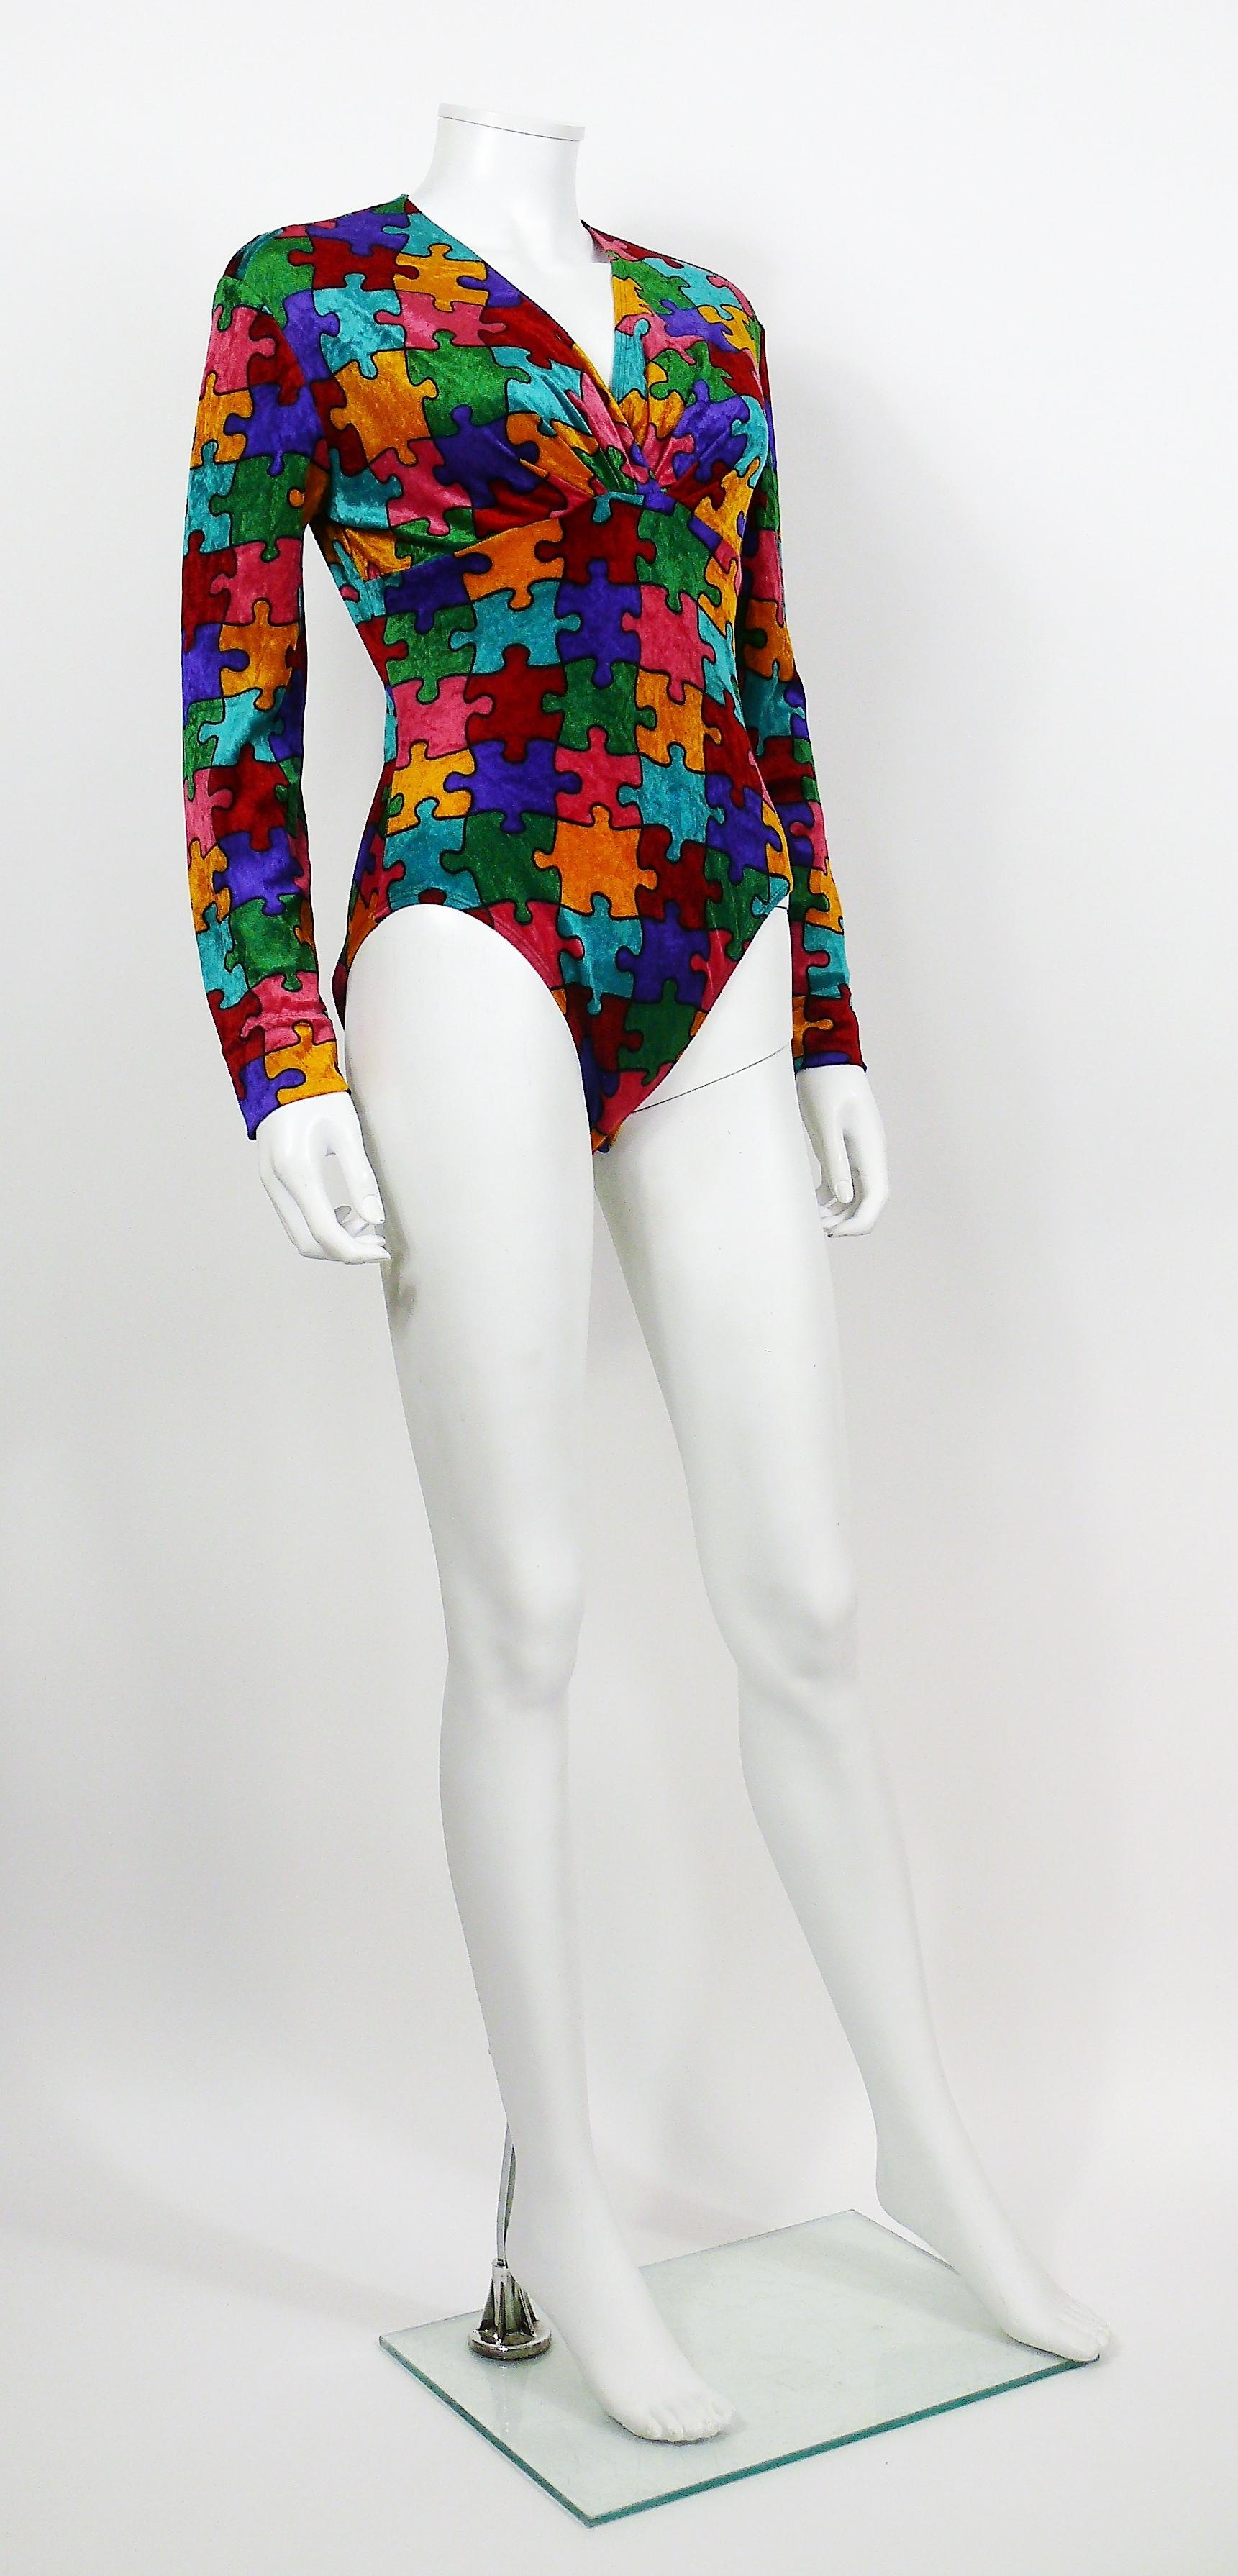 MOSCHINO vintage rare iconic multicolored puzzle print bodysuit.

This bodysuit features :
- Soft pluch fabric printed with a multicolored puzzle pattern.
- V neckline.
- Long sleeves.
- Snap button closure.

Label reads CHEAP AND CHIC by